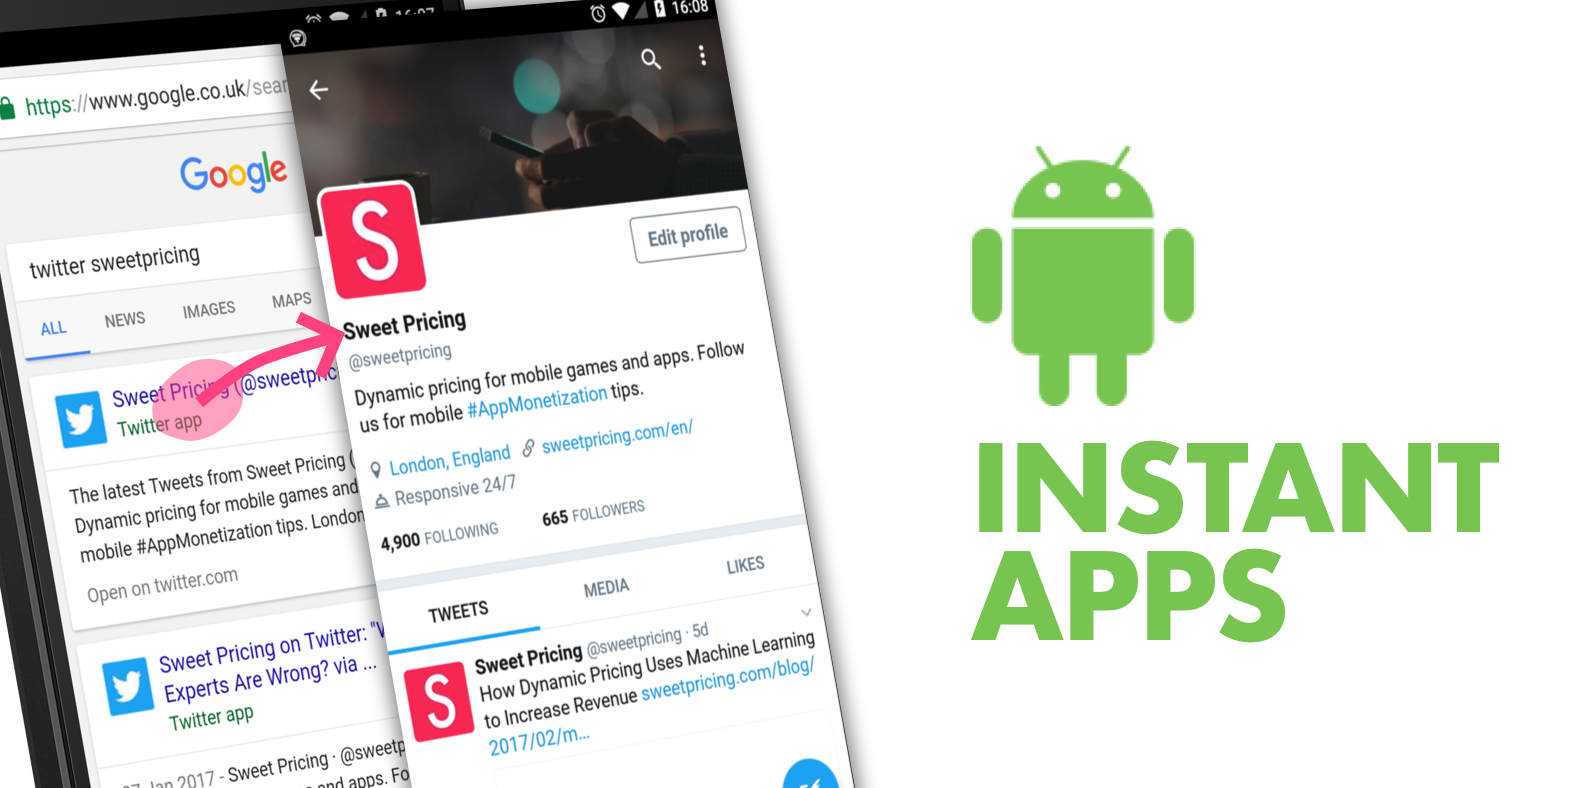 Android Instant Apps gives access to mobile apps without installation.